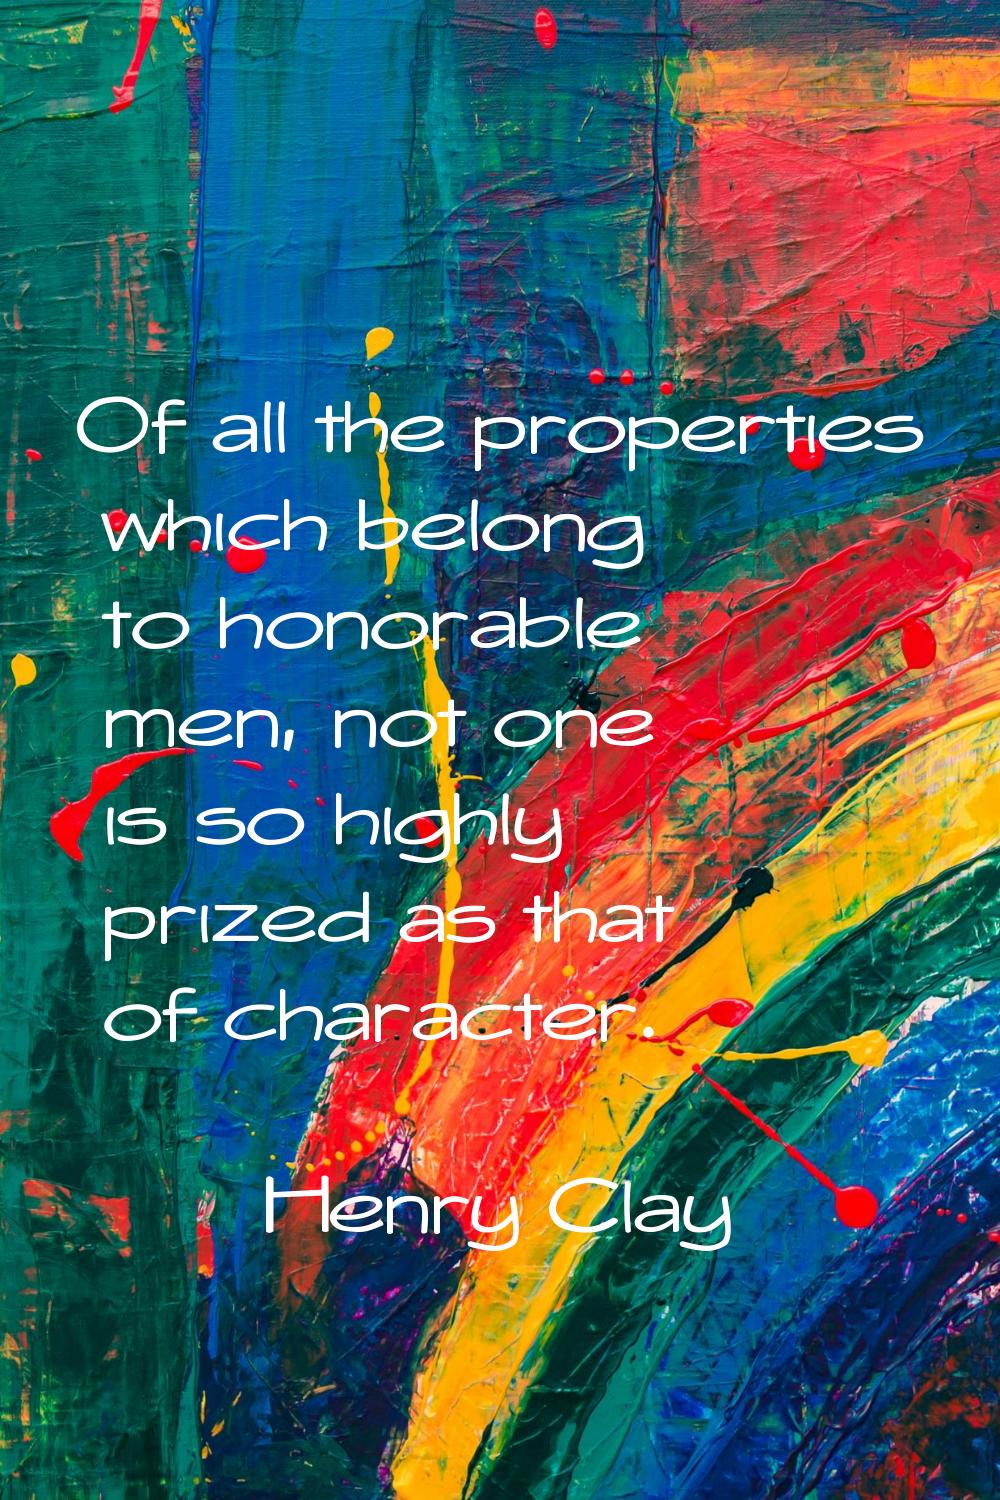 Of all the properties which belong to honorable men, not one is so highly prized as that of charact